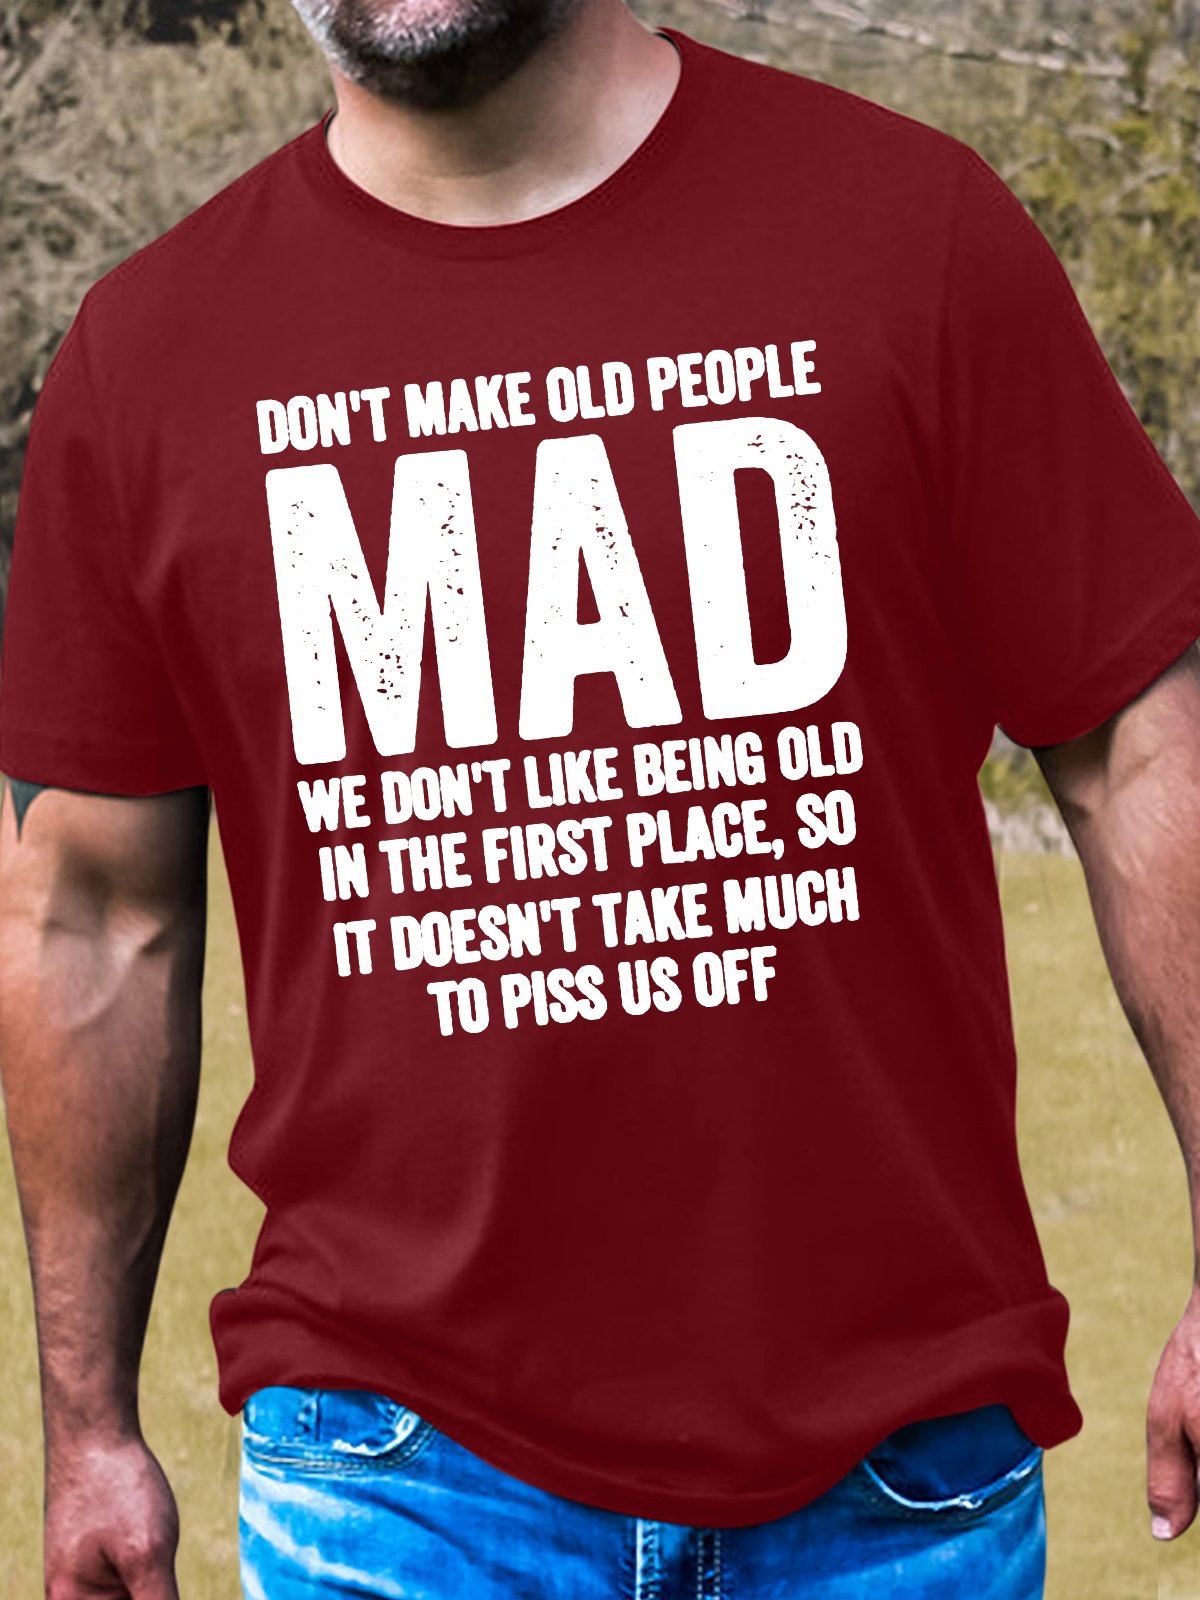 Women's Cotton Don't Make Old People Mad We Don't like Being Old Crew Neck T-Shirt